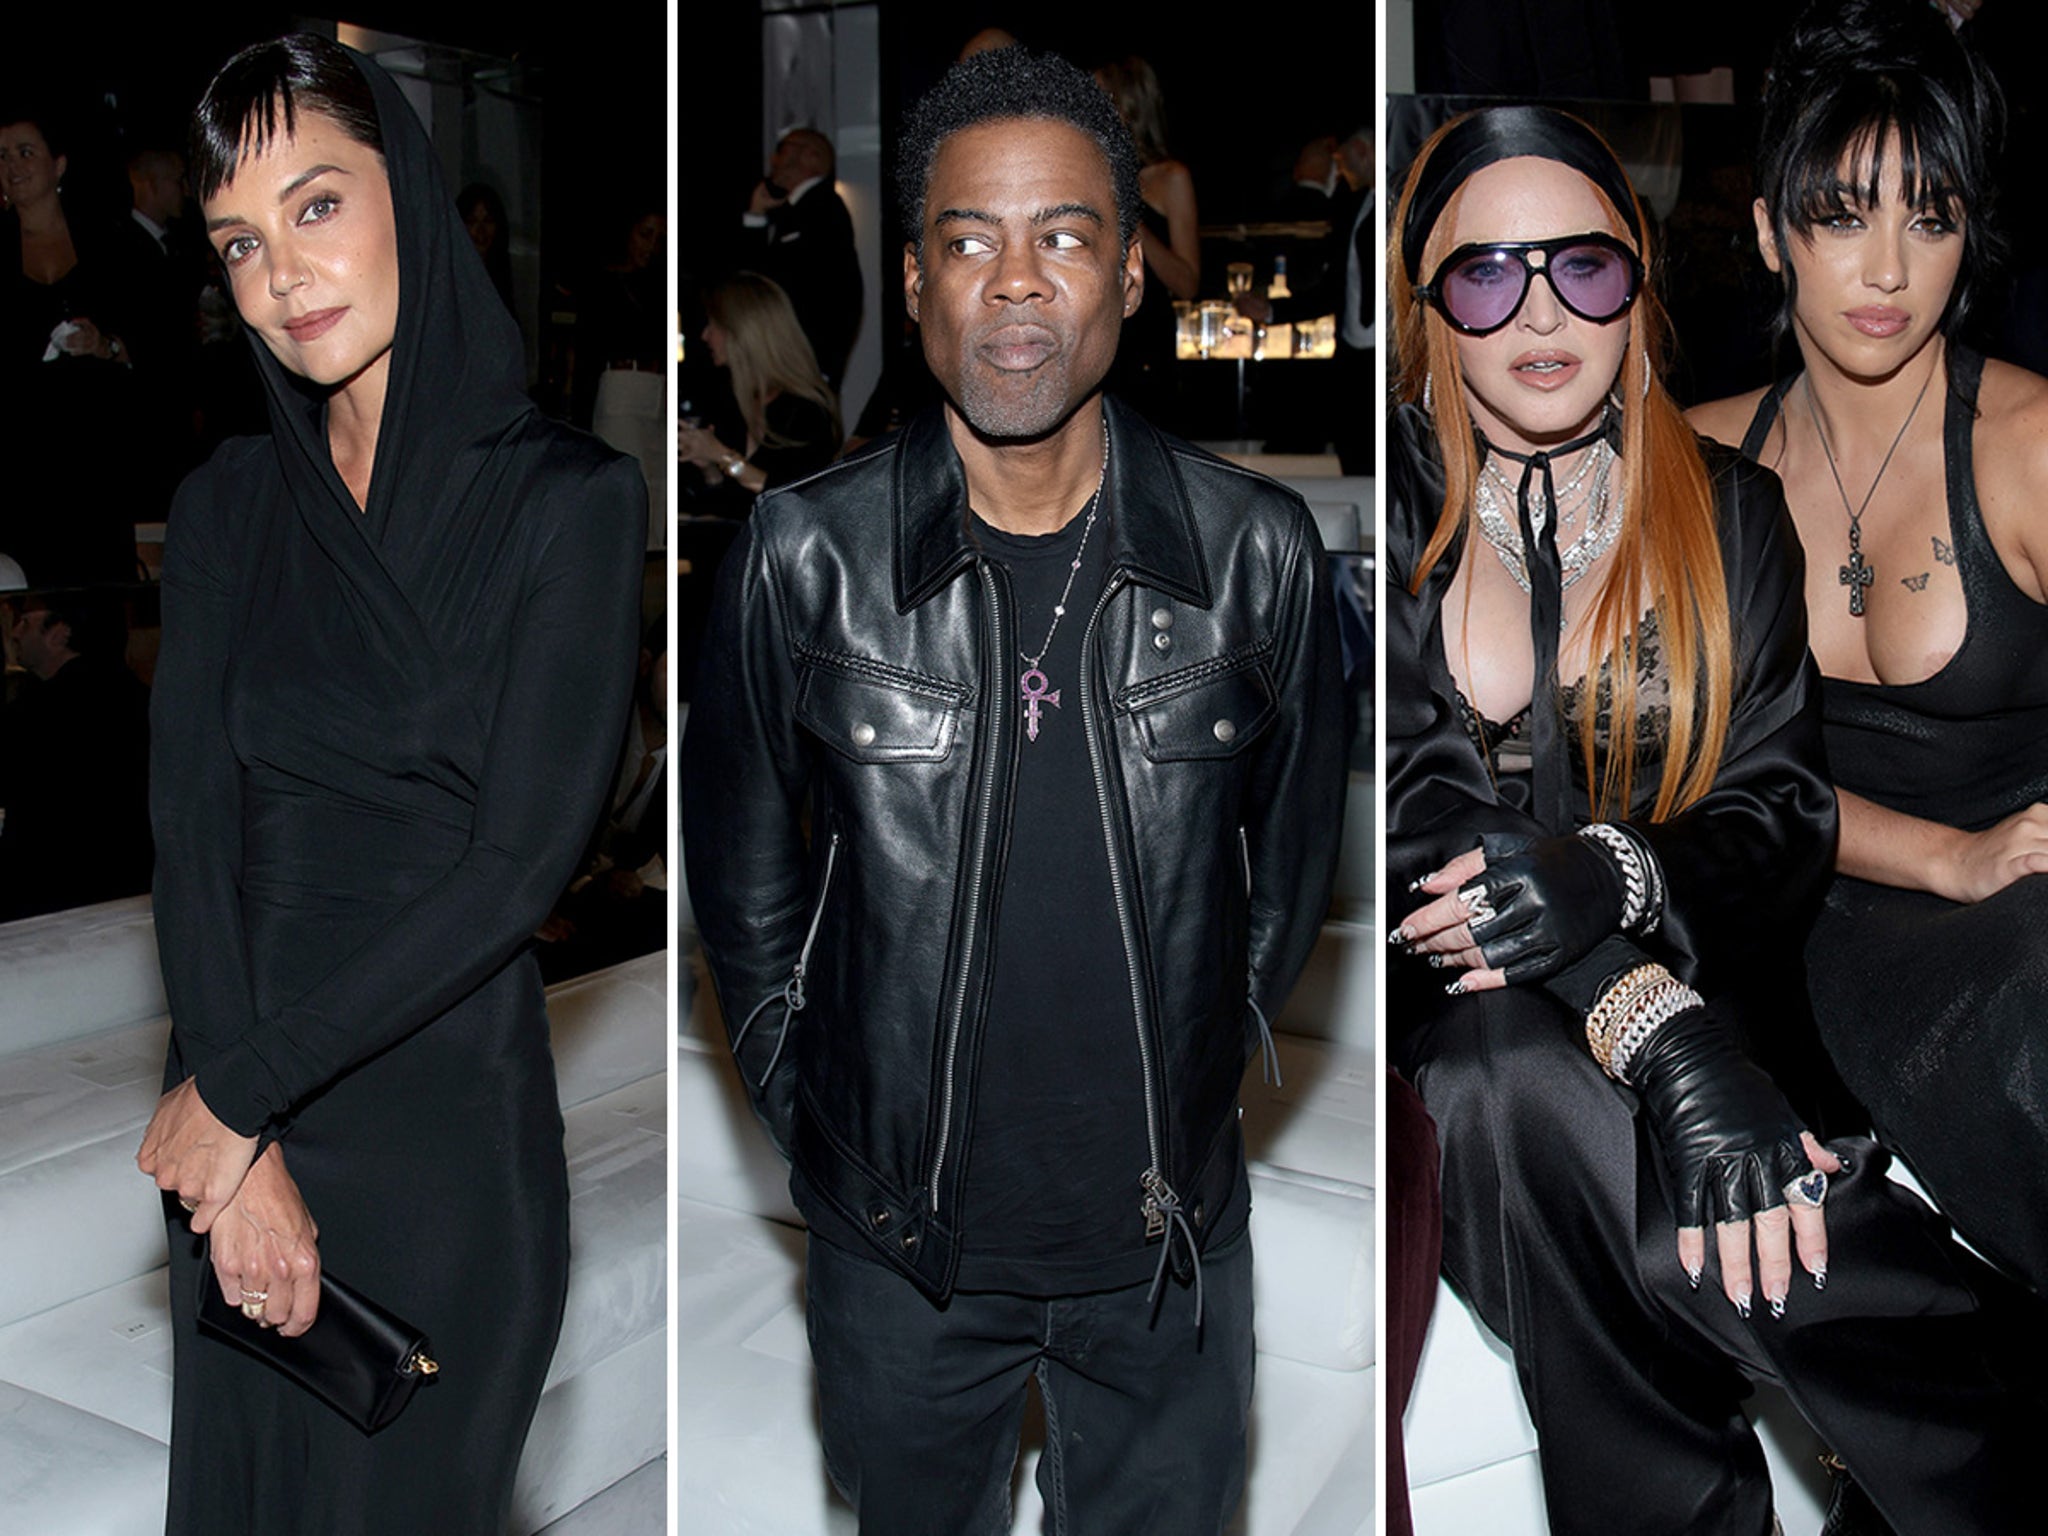 Celebs Front Row at Tom Ford NYFW Show